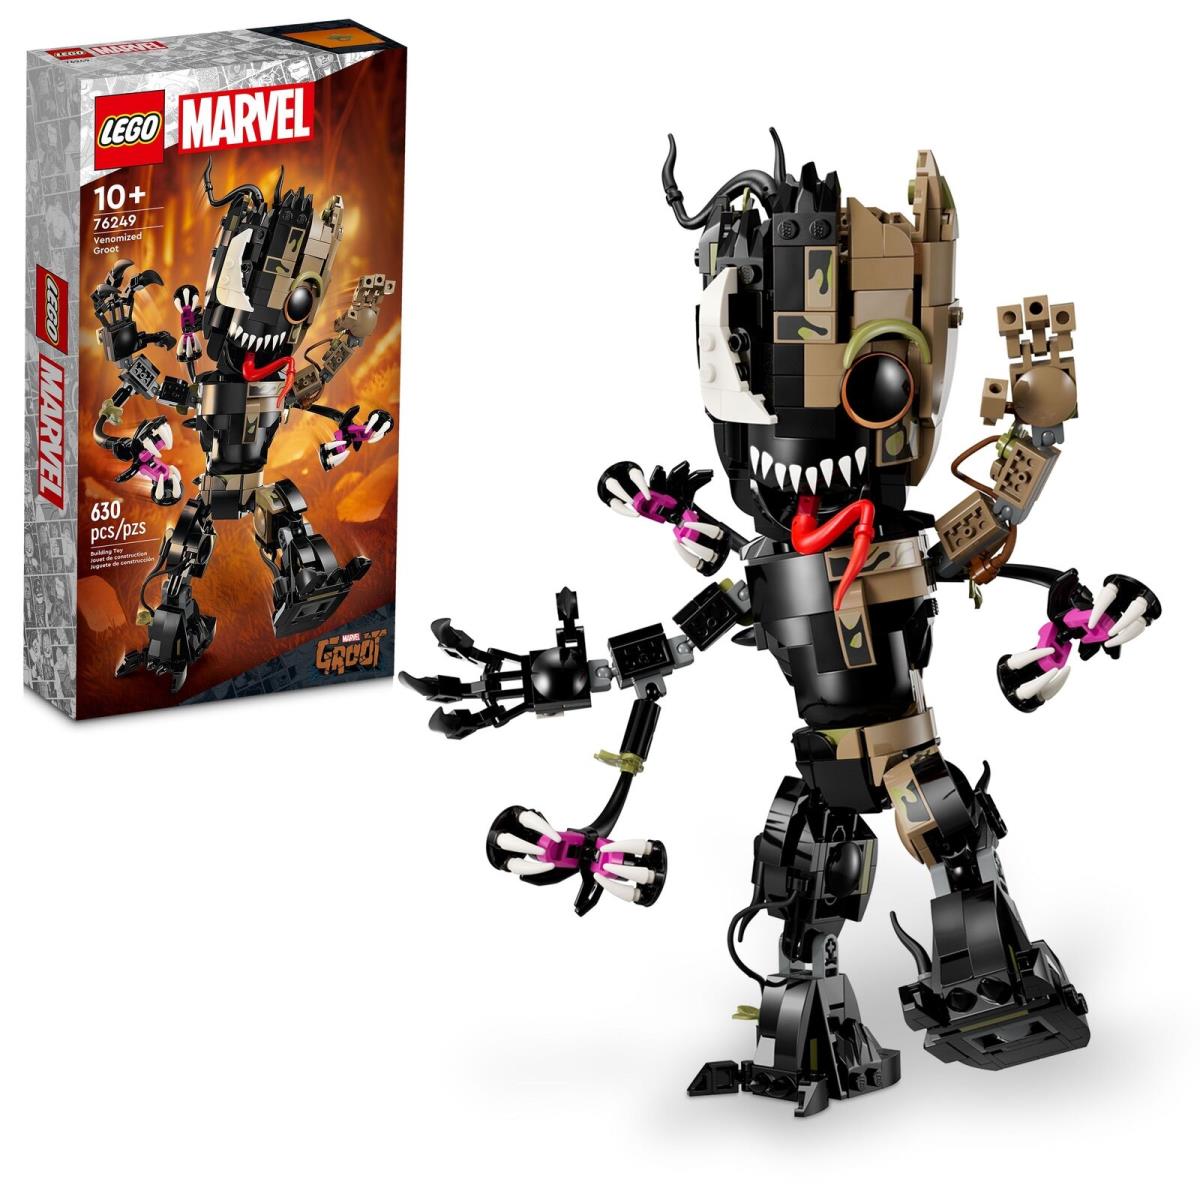 Lego Marvel Venomized Groot 76249 Transformable Marvel Toy For Play and Display